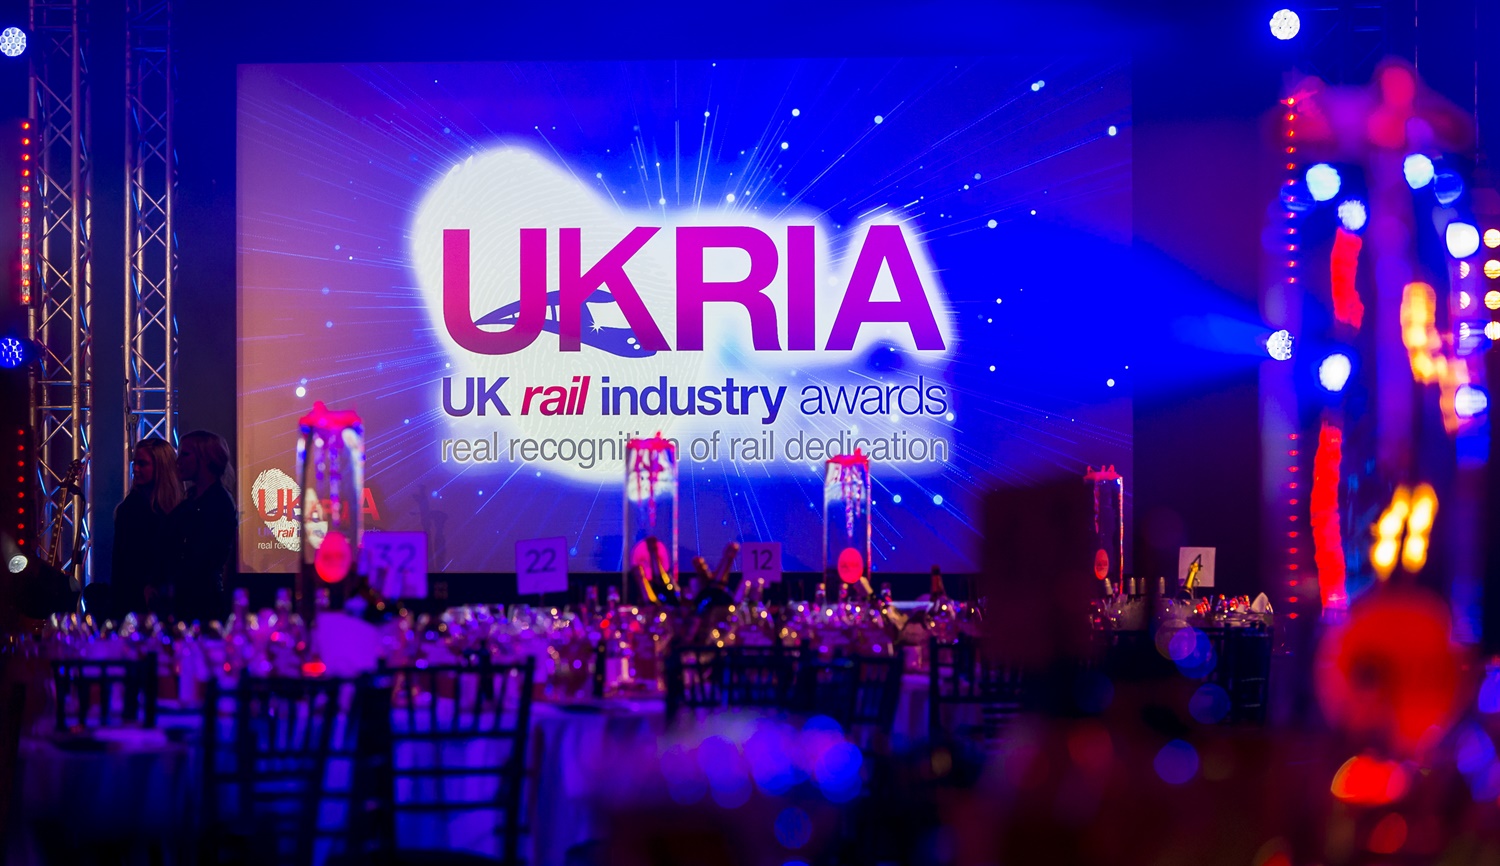 UKRIA sees record-breaking number of entries ahead of ‘extraordinary’ event